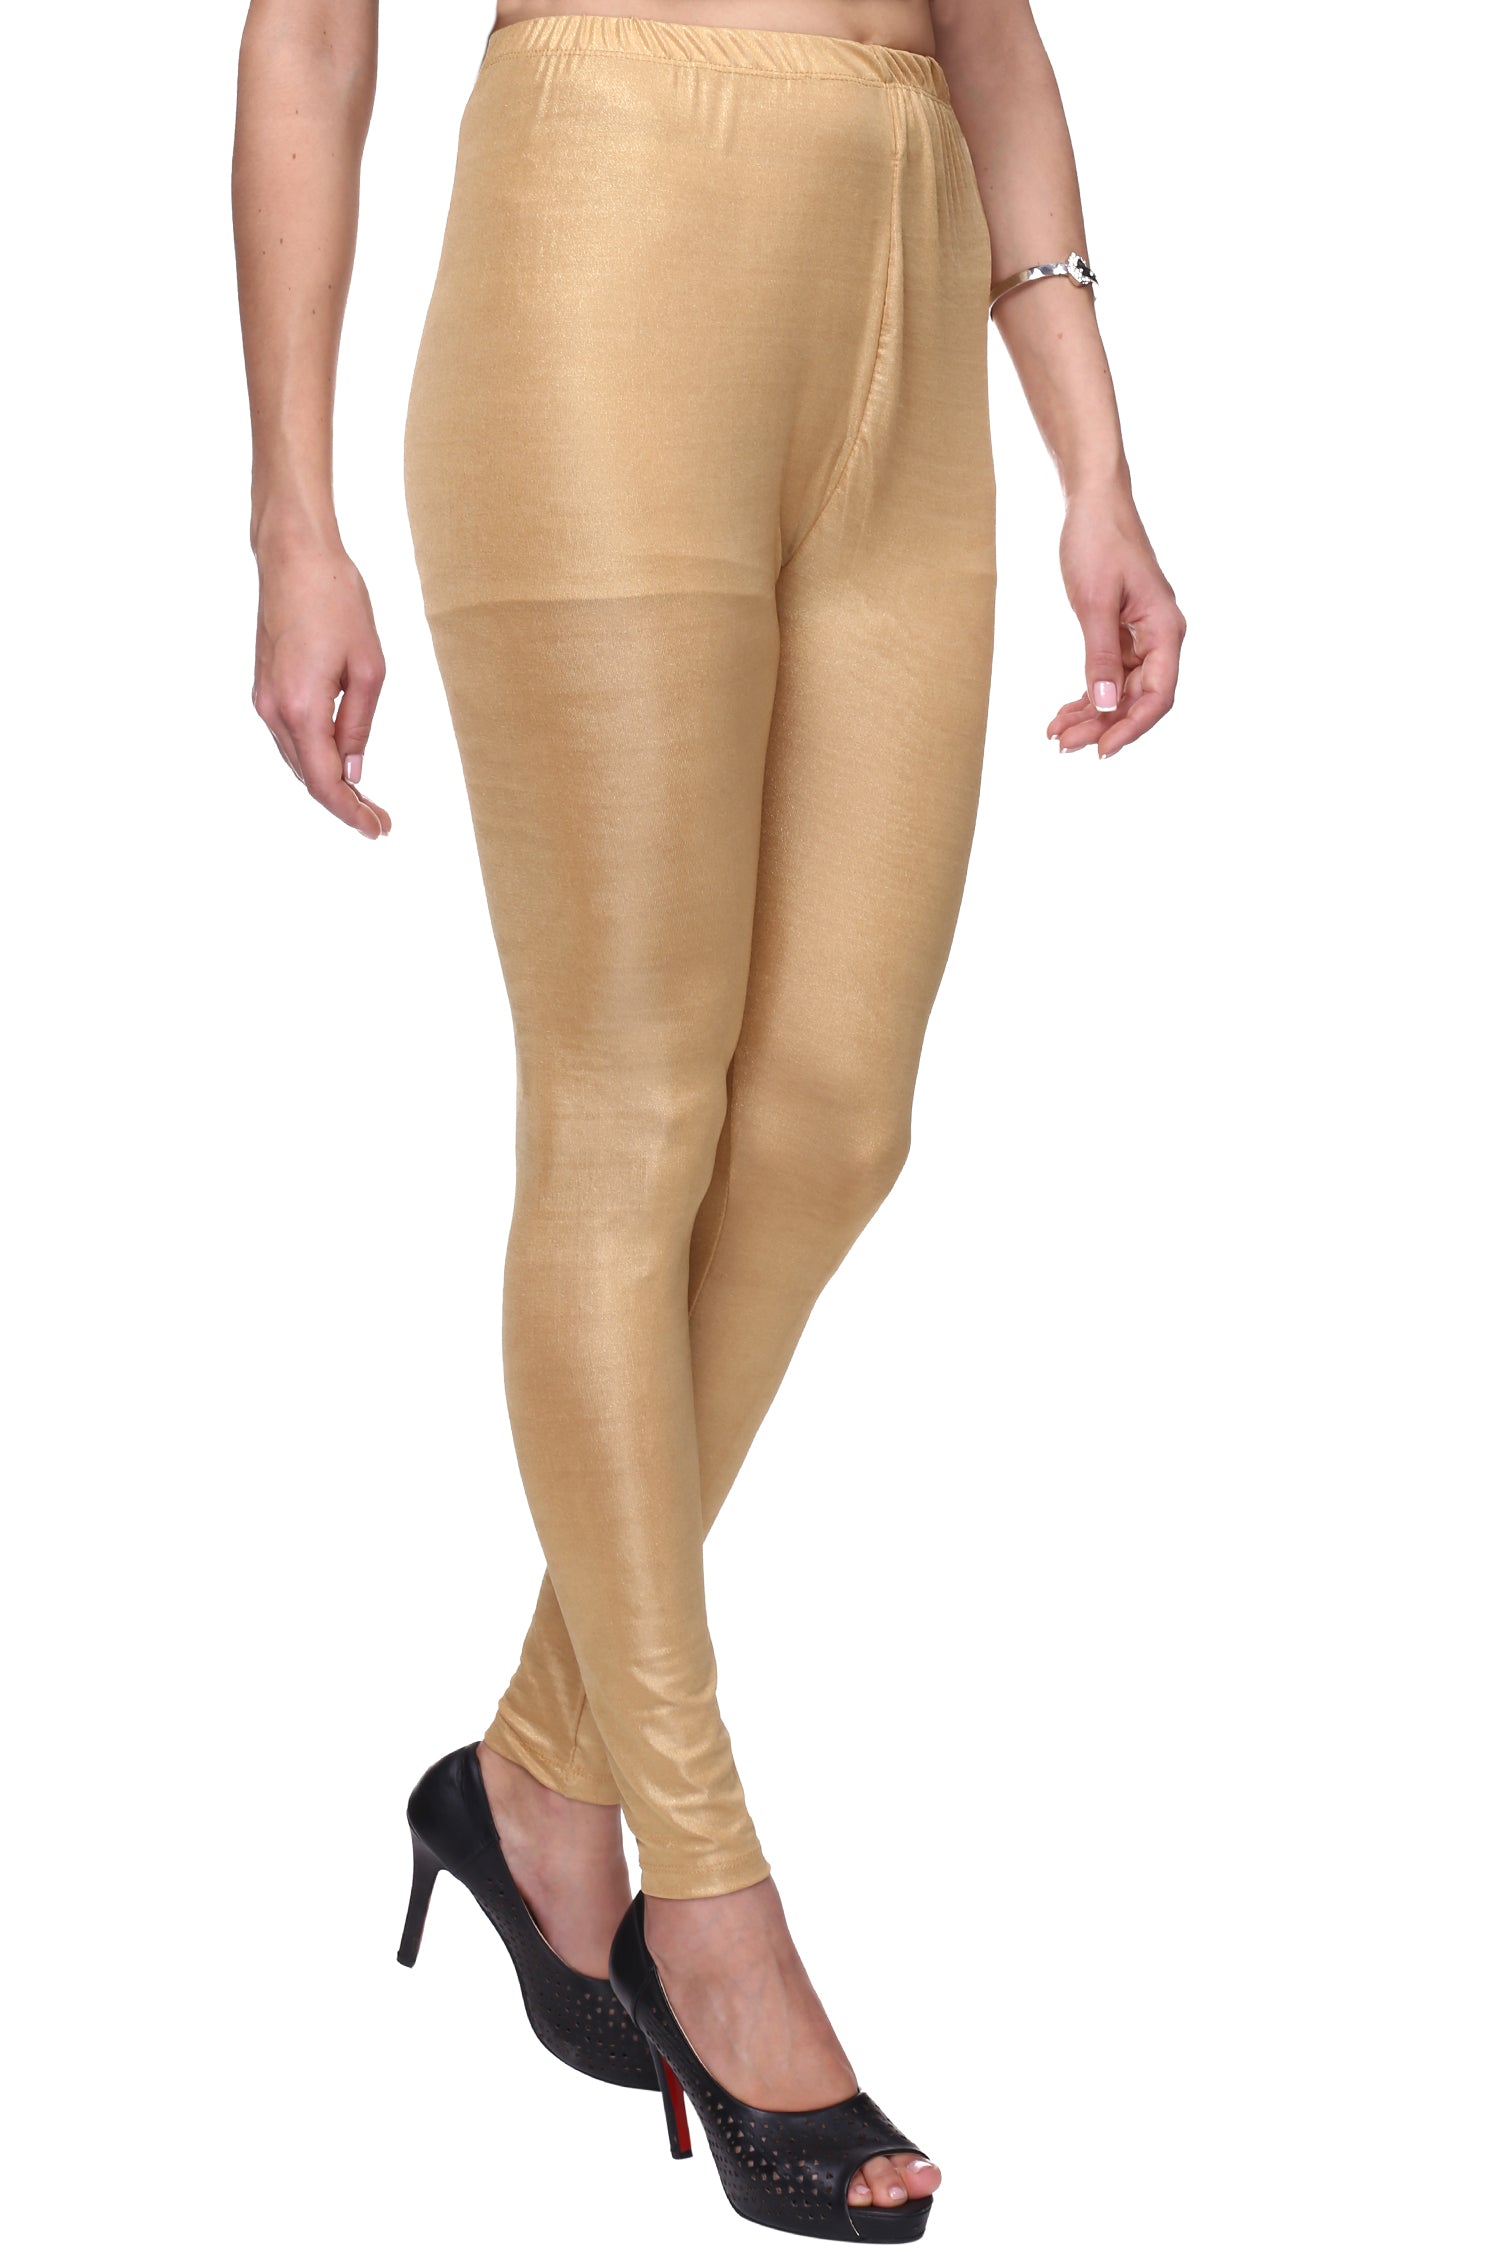 Super Shiny Leggings with Tulle Inserts - Calzedonia